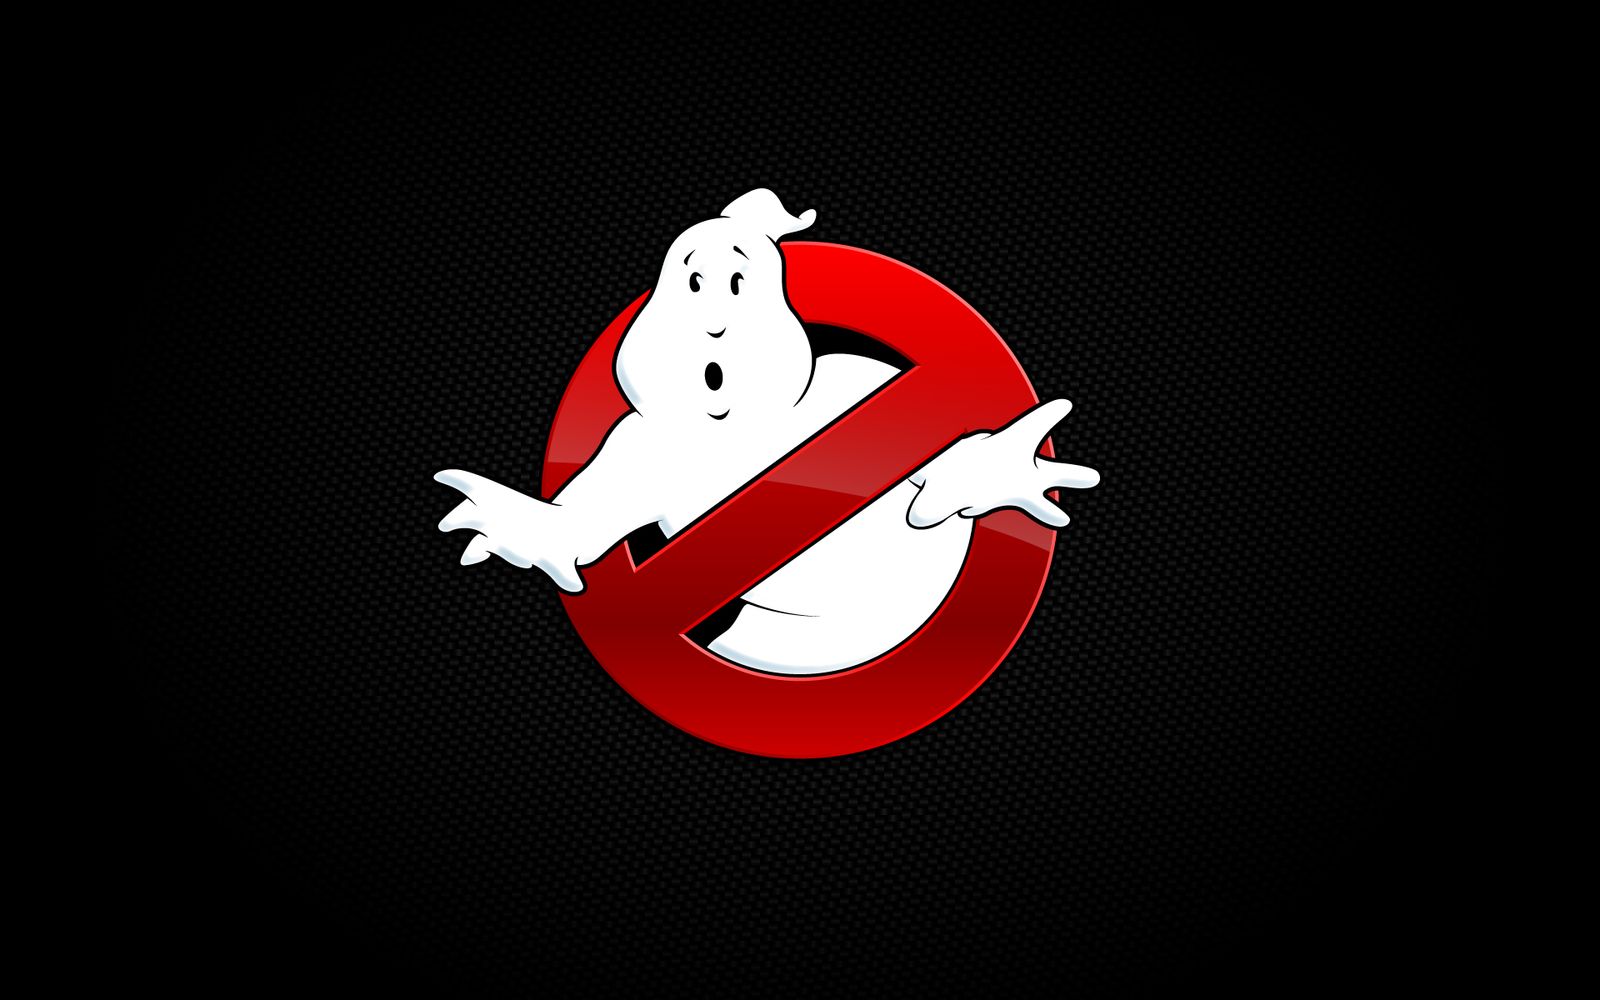 Animated Ghostbusters Movie In Development?